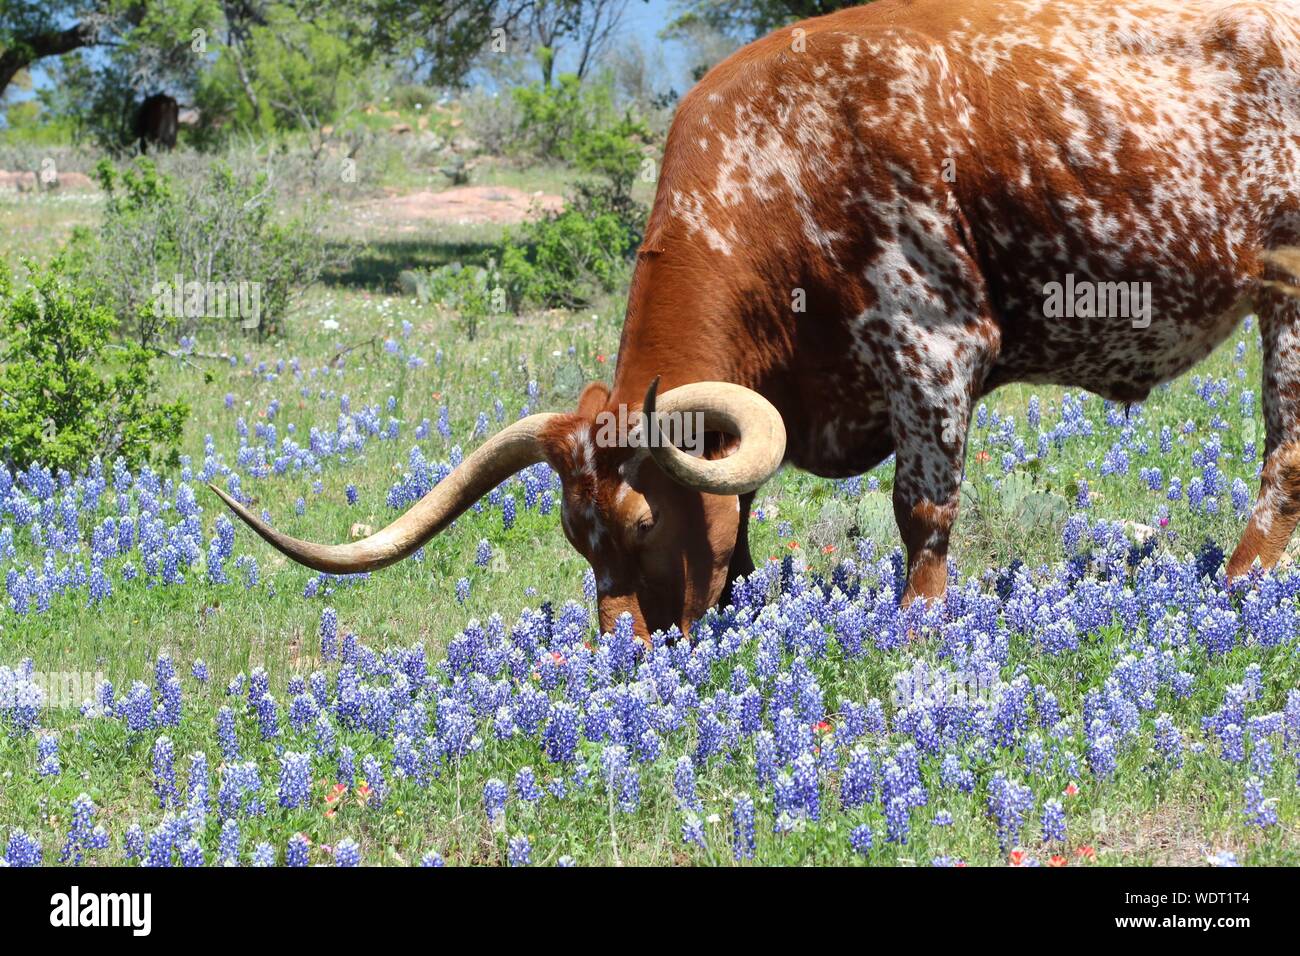 Texas Longhorn eating in a field of Bluebonnets Stock Photo